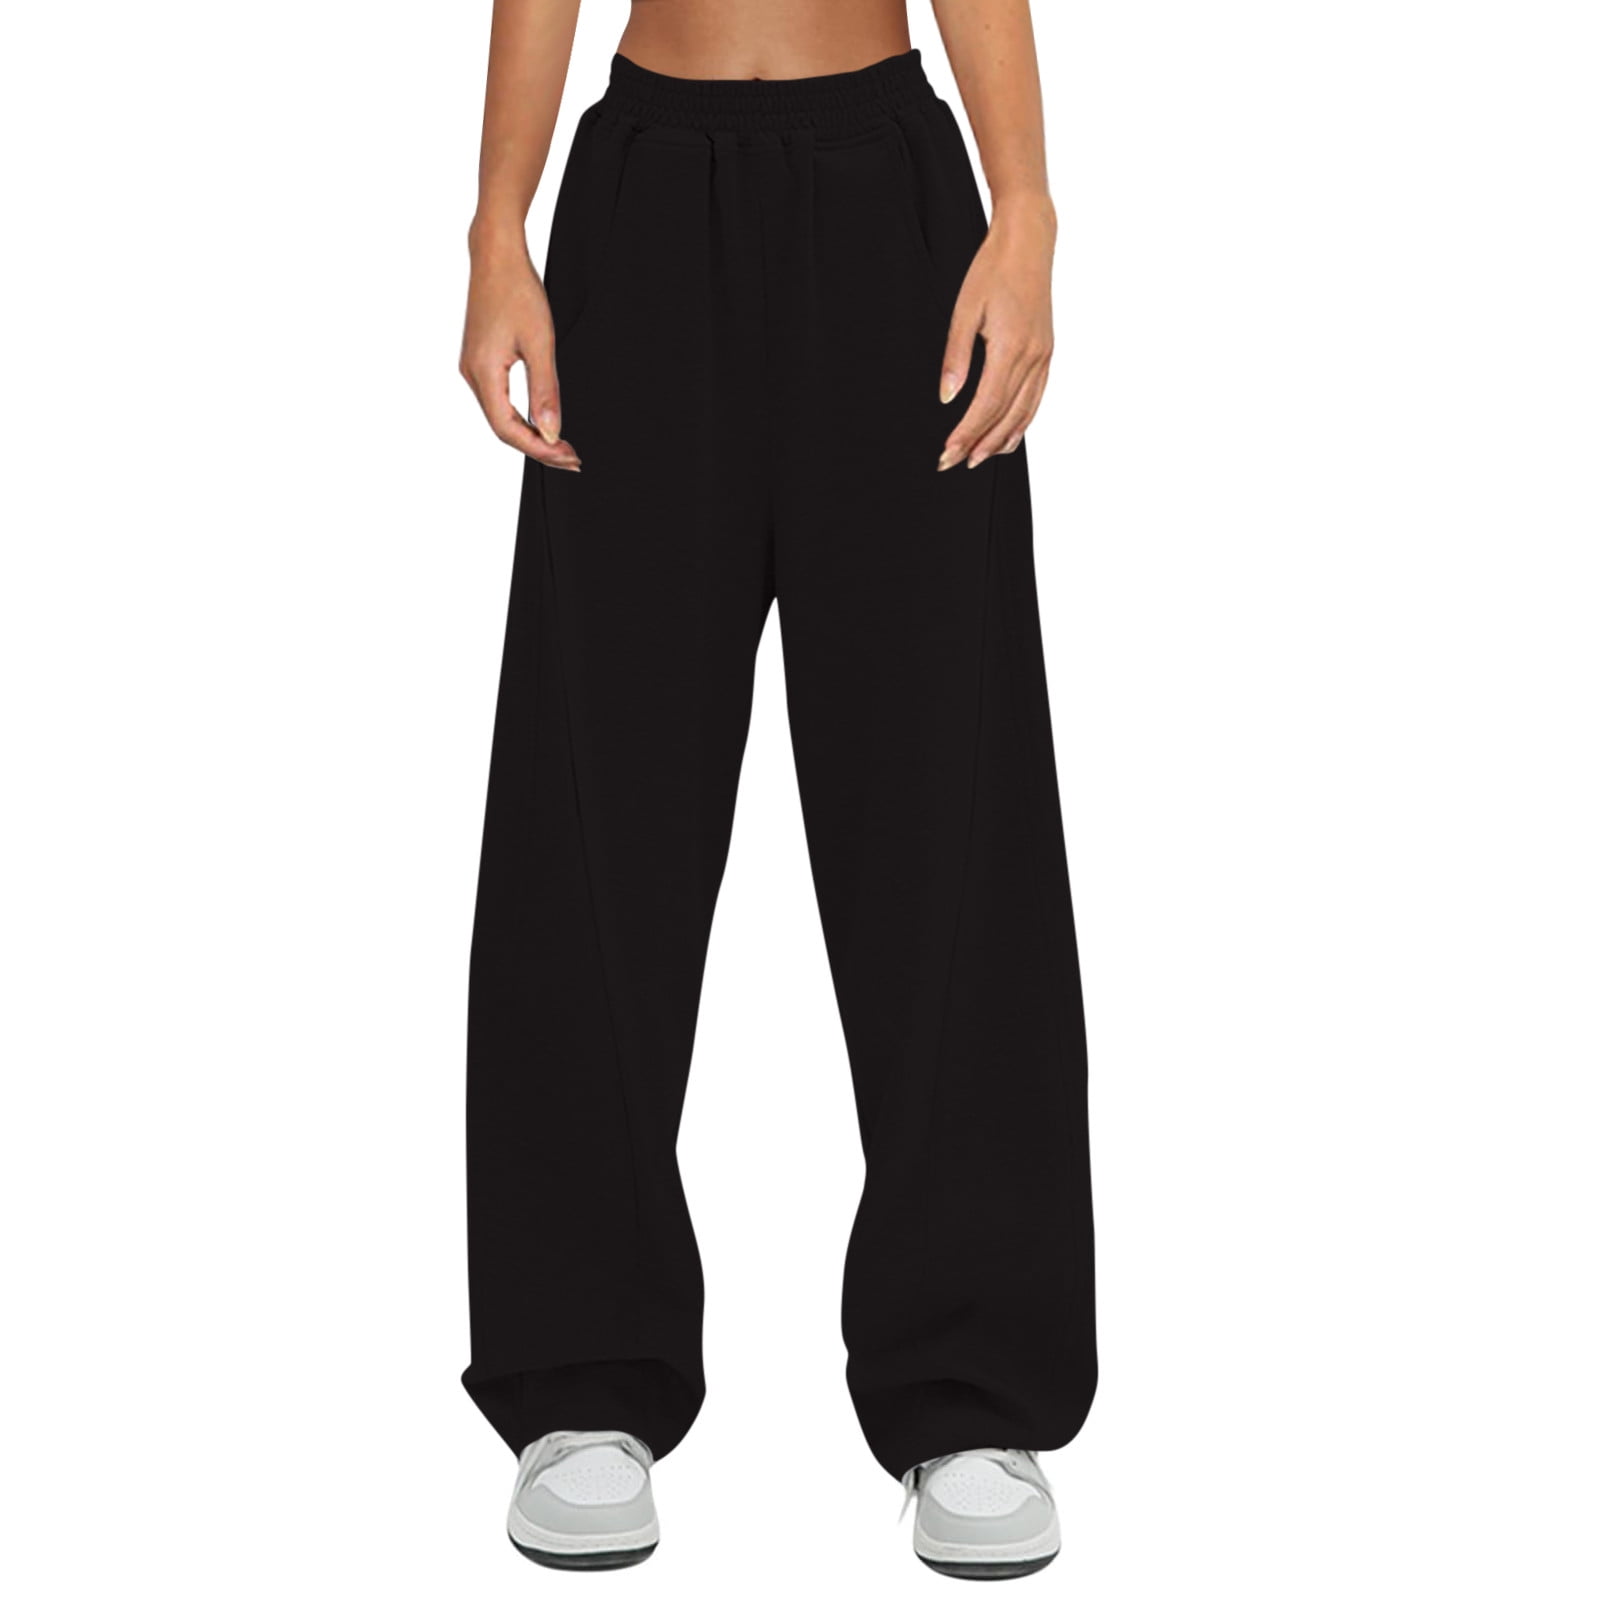 RPVATI Ladies Sweatpants With Pockets Clearance Elastic Waist Loose Fit ...